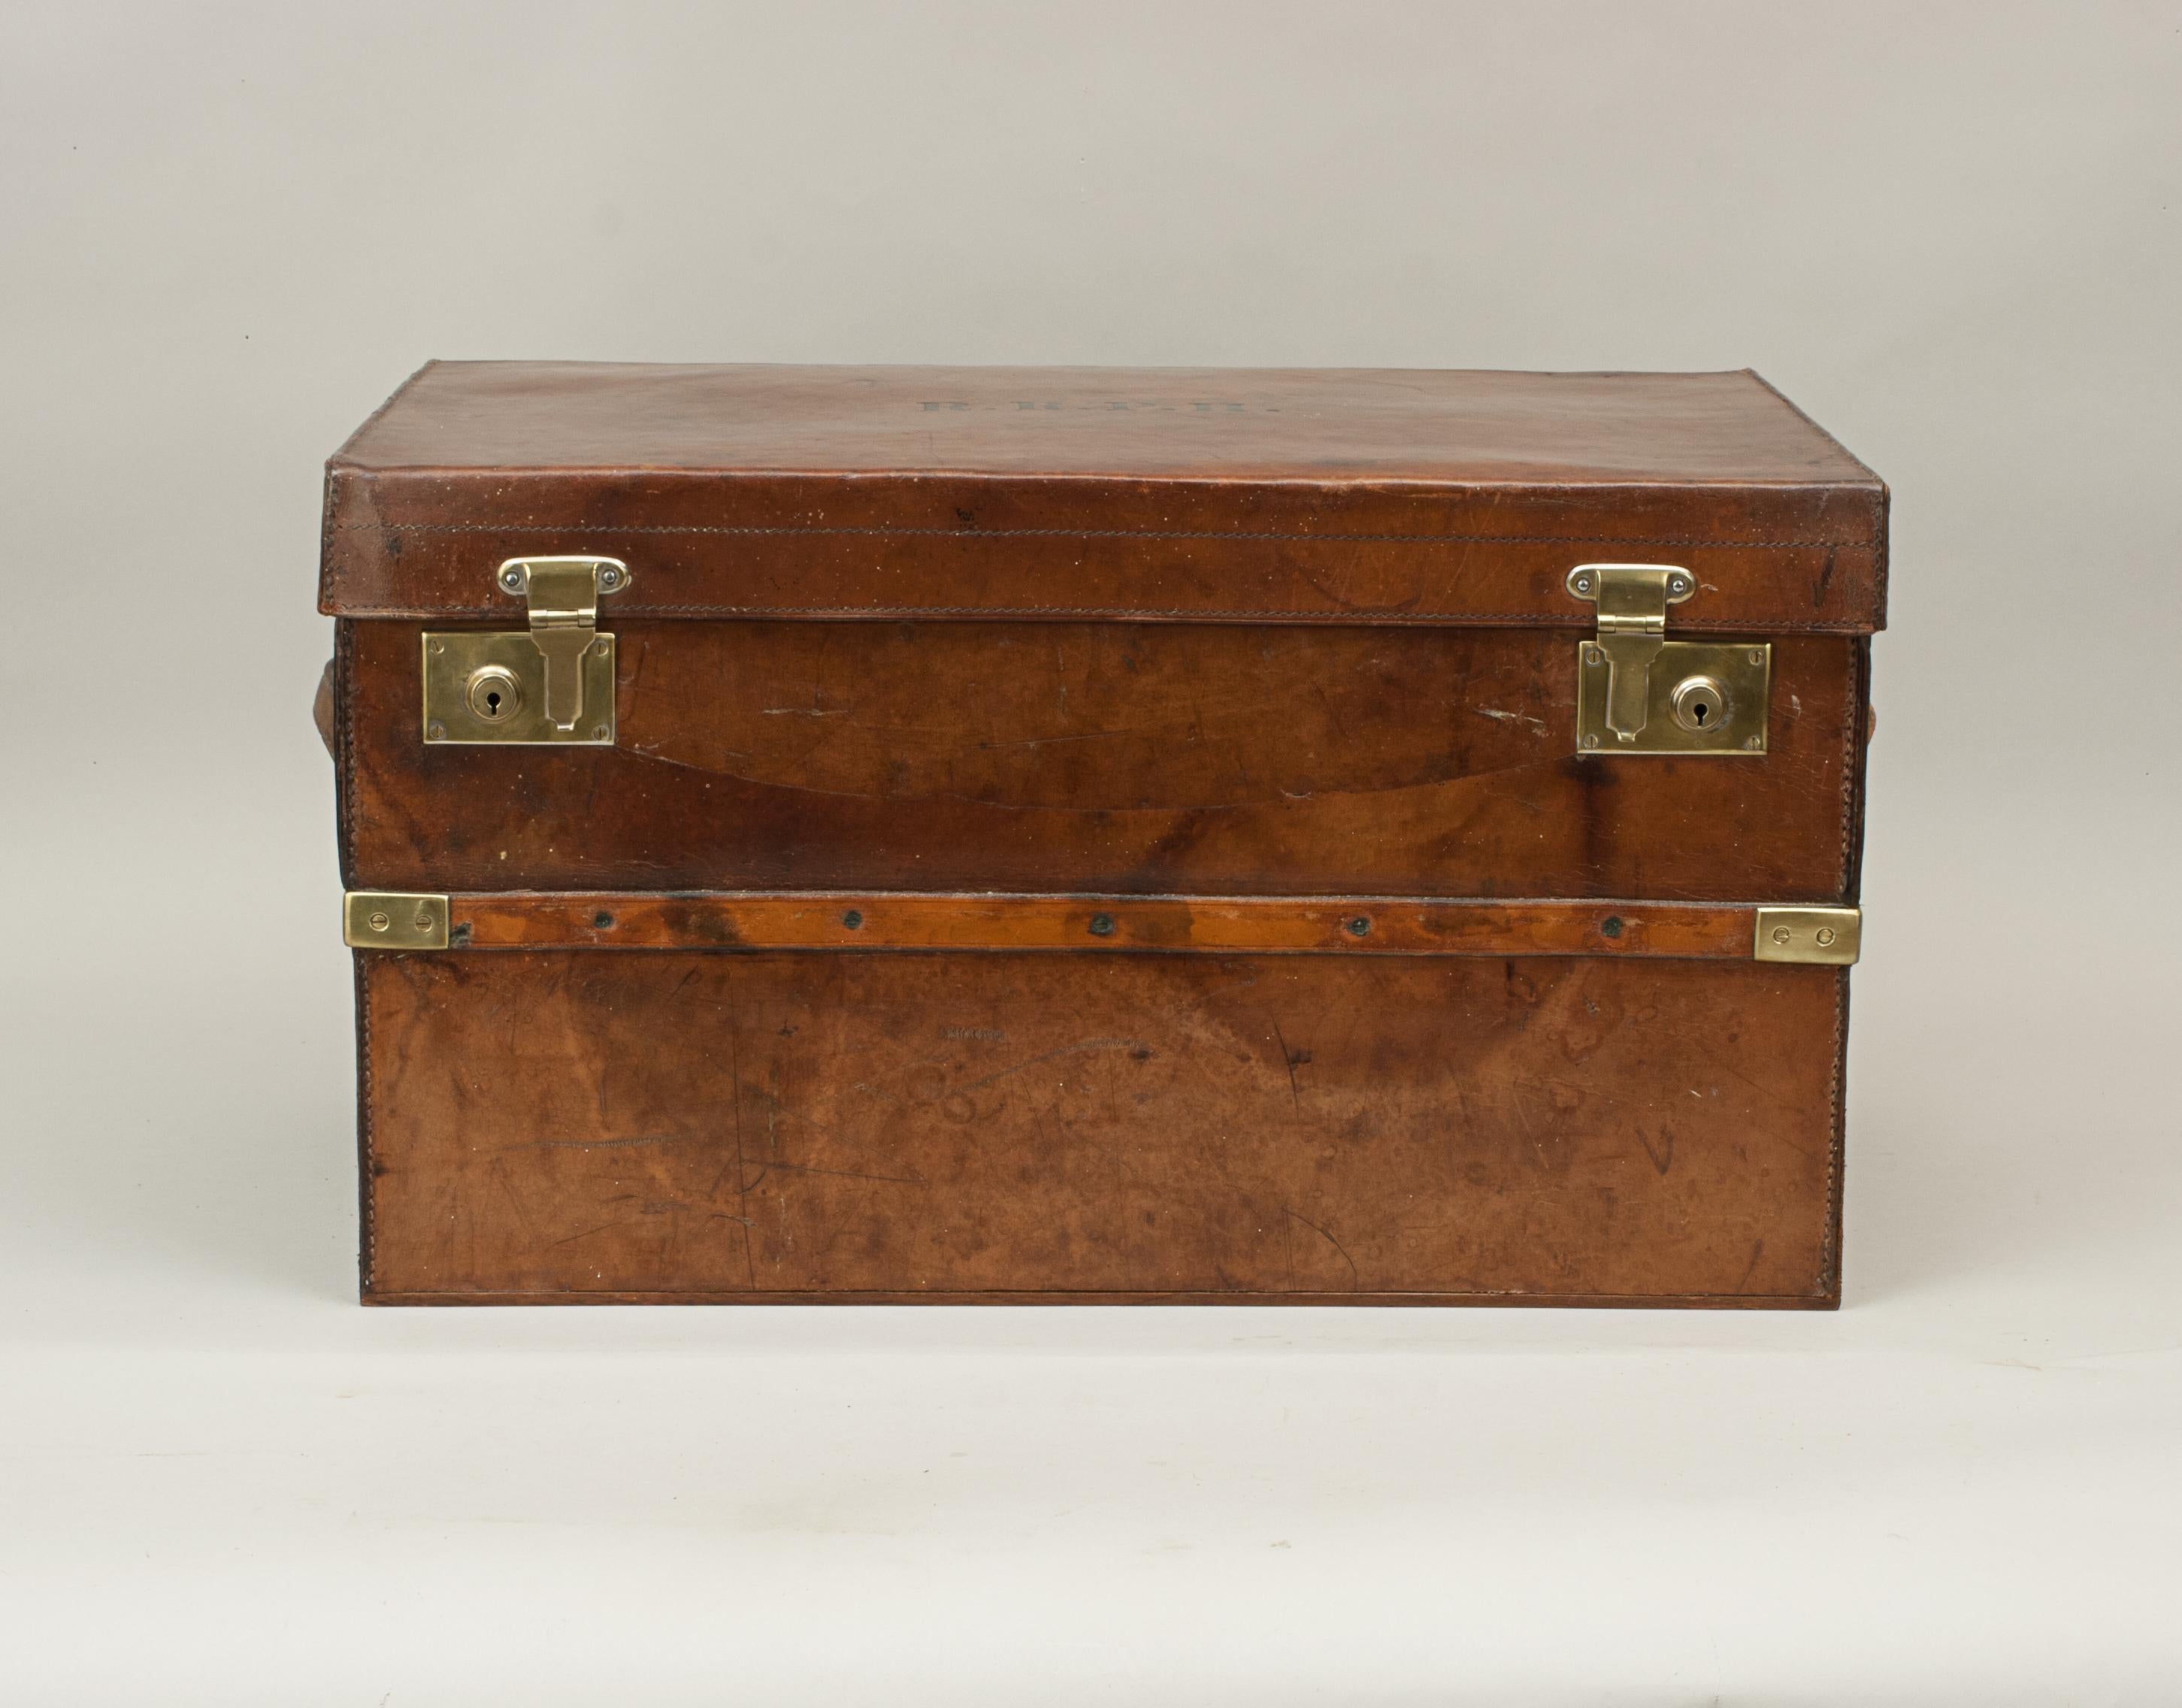 Brass Bound travelling trunk.
A sturdy leather bound travel trunk with brass locks and strapping with leather carry handle at either end. The top embossed 'R.R.P.H'. made by Webb & Bryant, Southsea. The interior sound and clean. The trunk has been